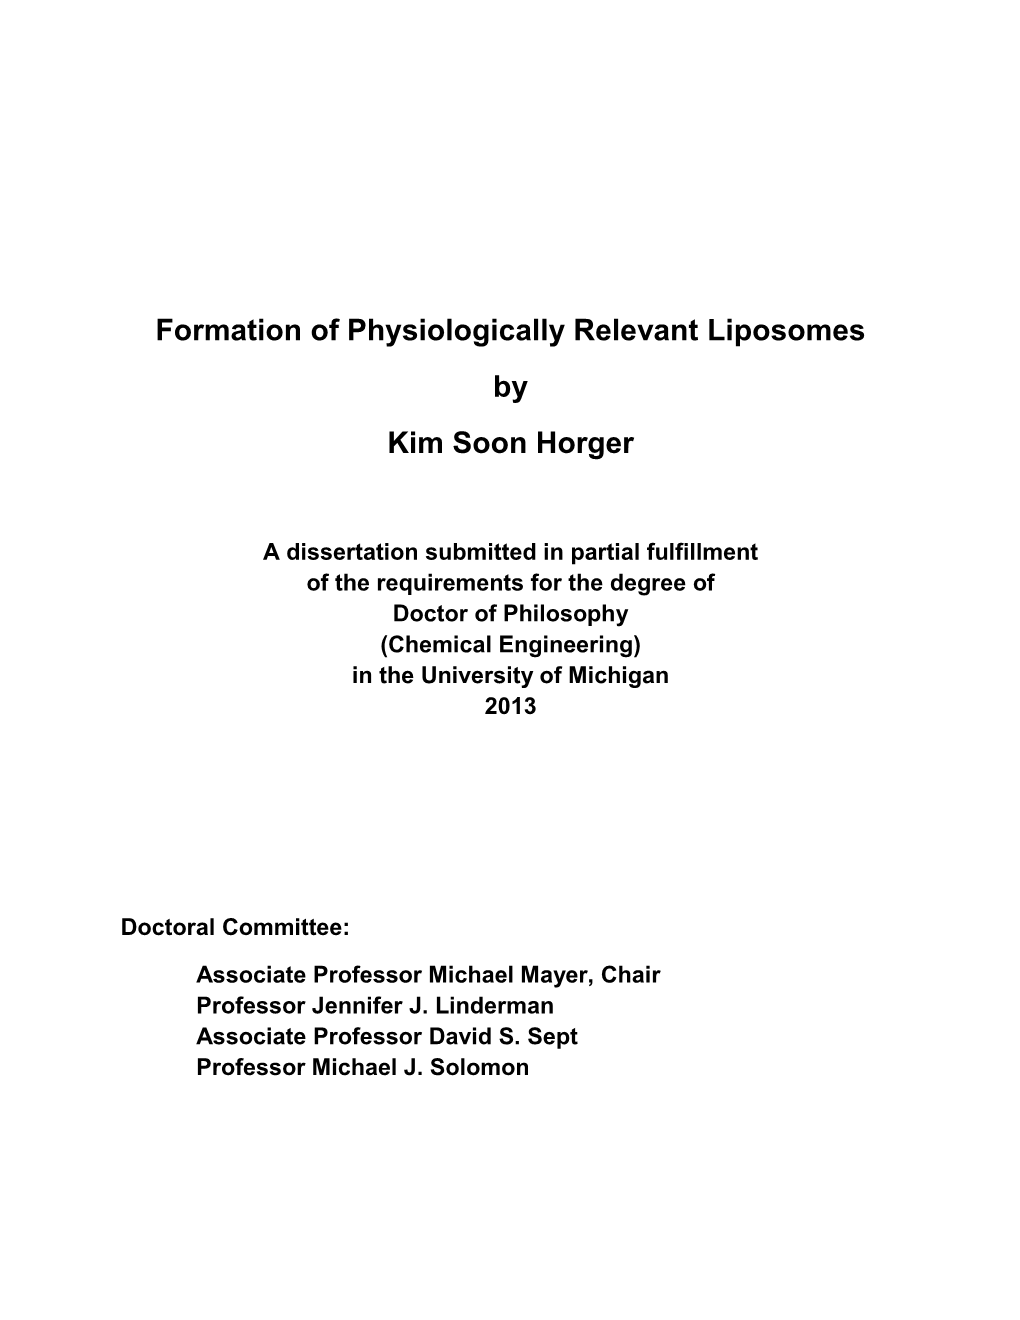 Formation of Physiologically Relevant Liposomes by Kim Soon Horger